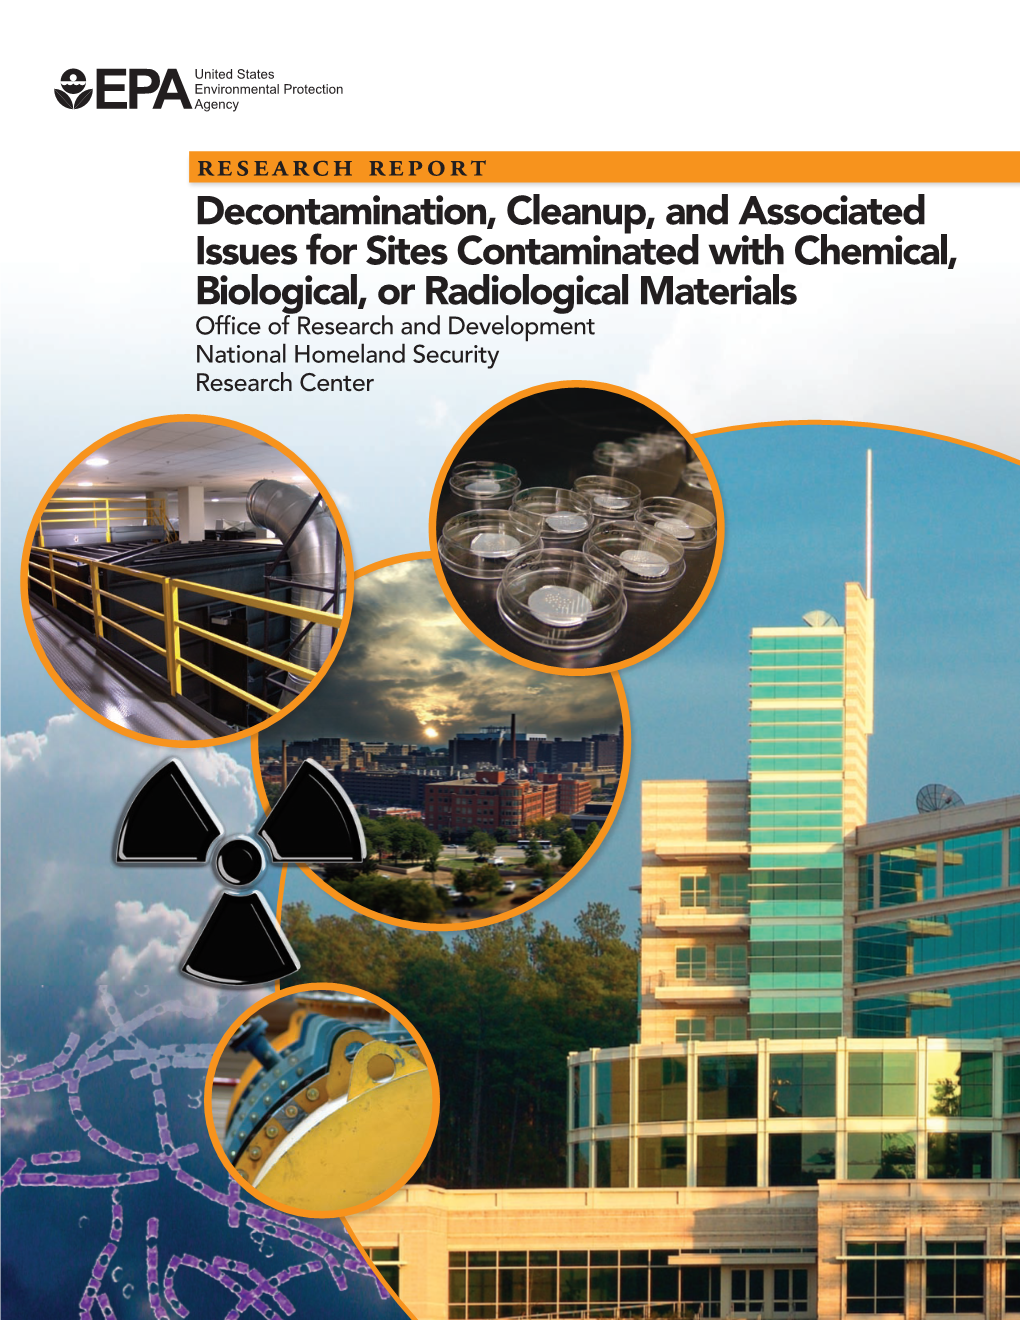 Workshop on Decontamination, Cleanup and Associated Issues For